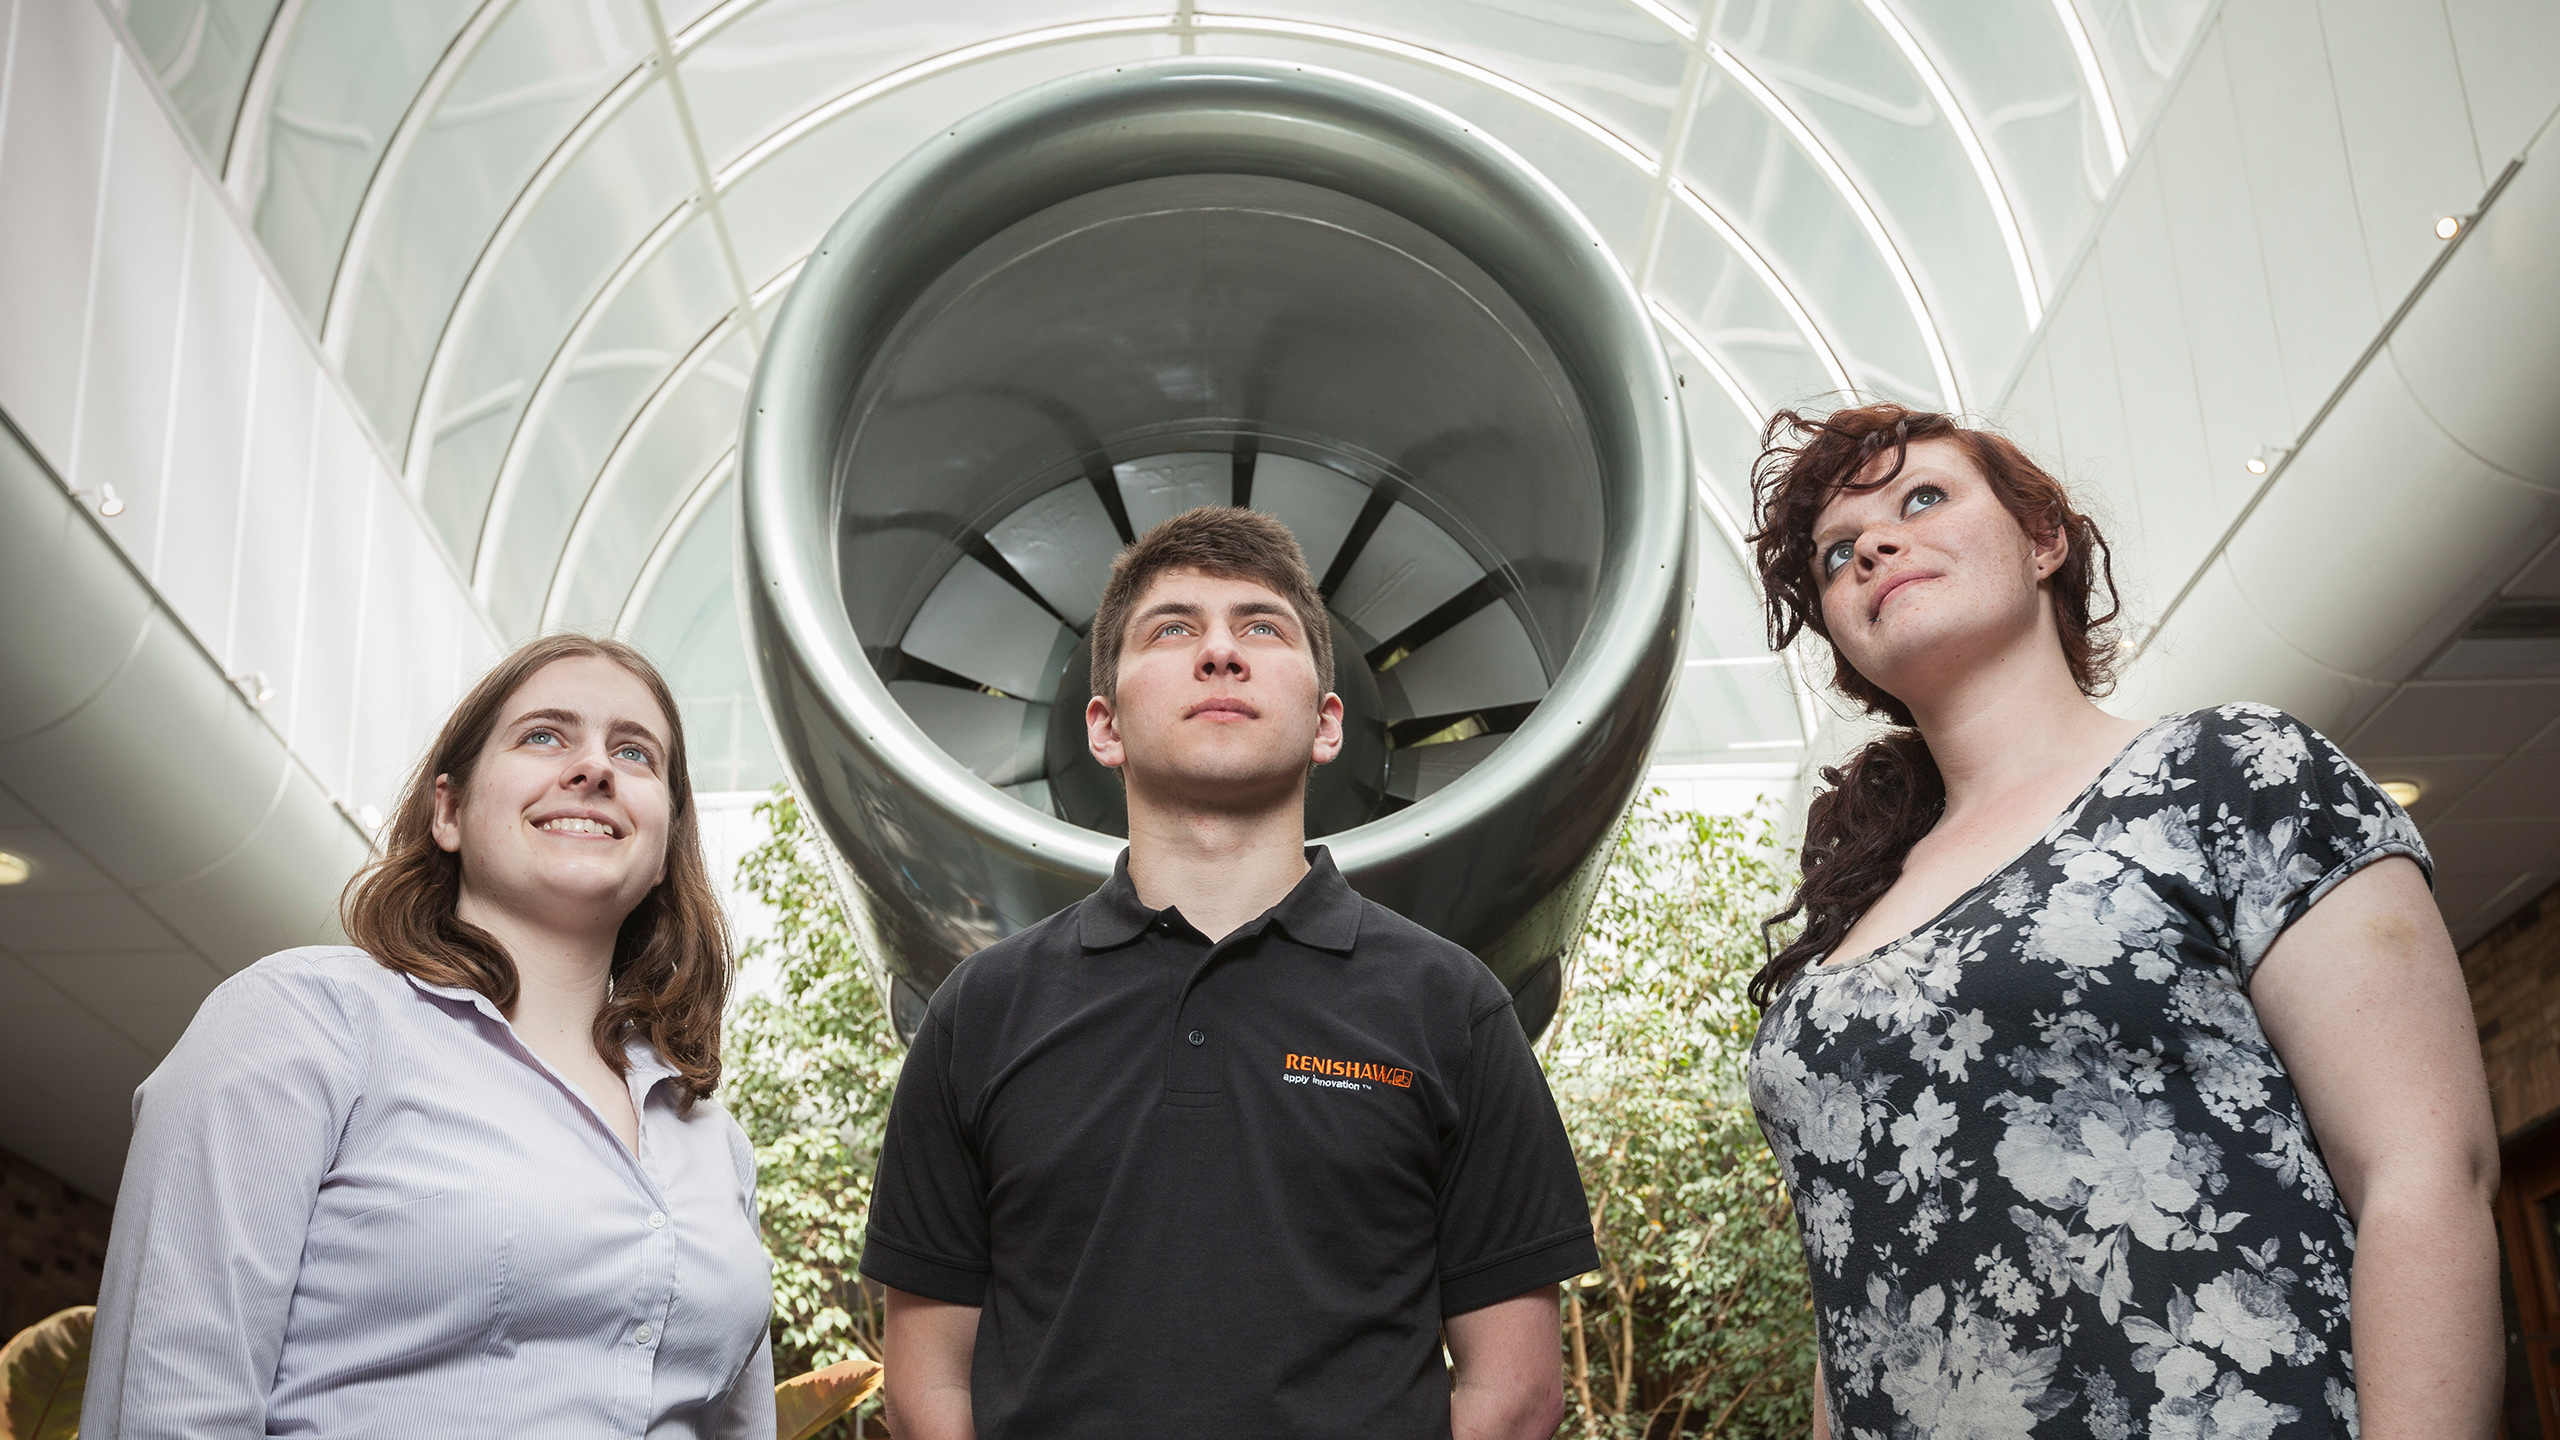 Students on placement at Renishaw look upwards under a turbine